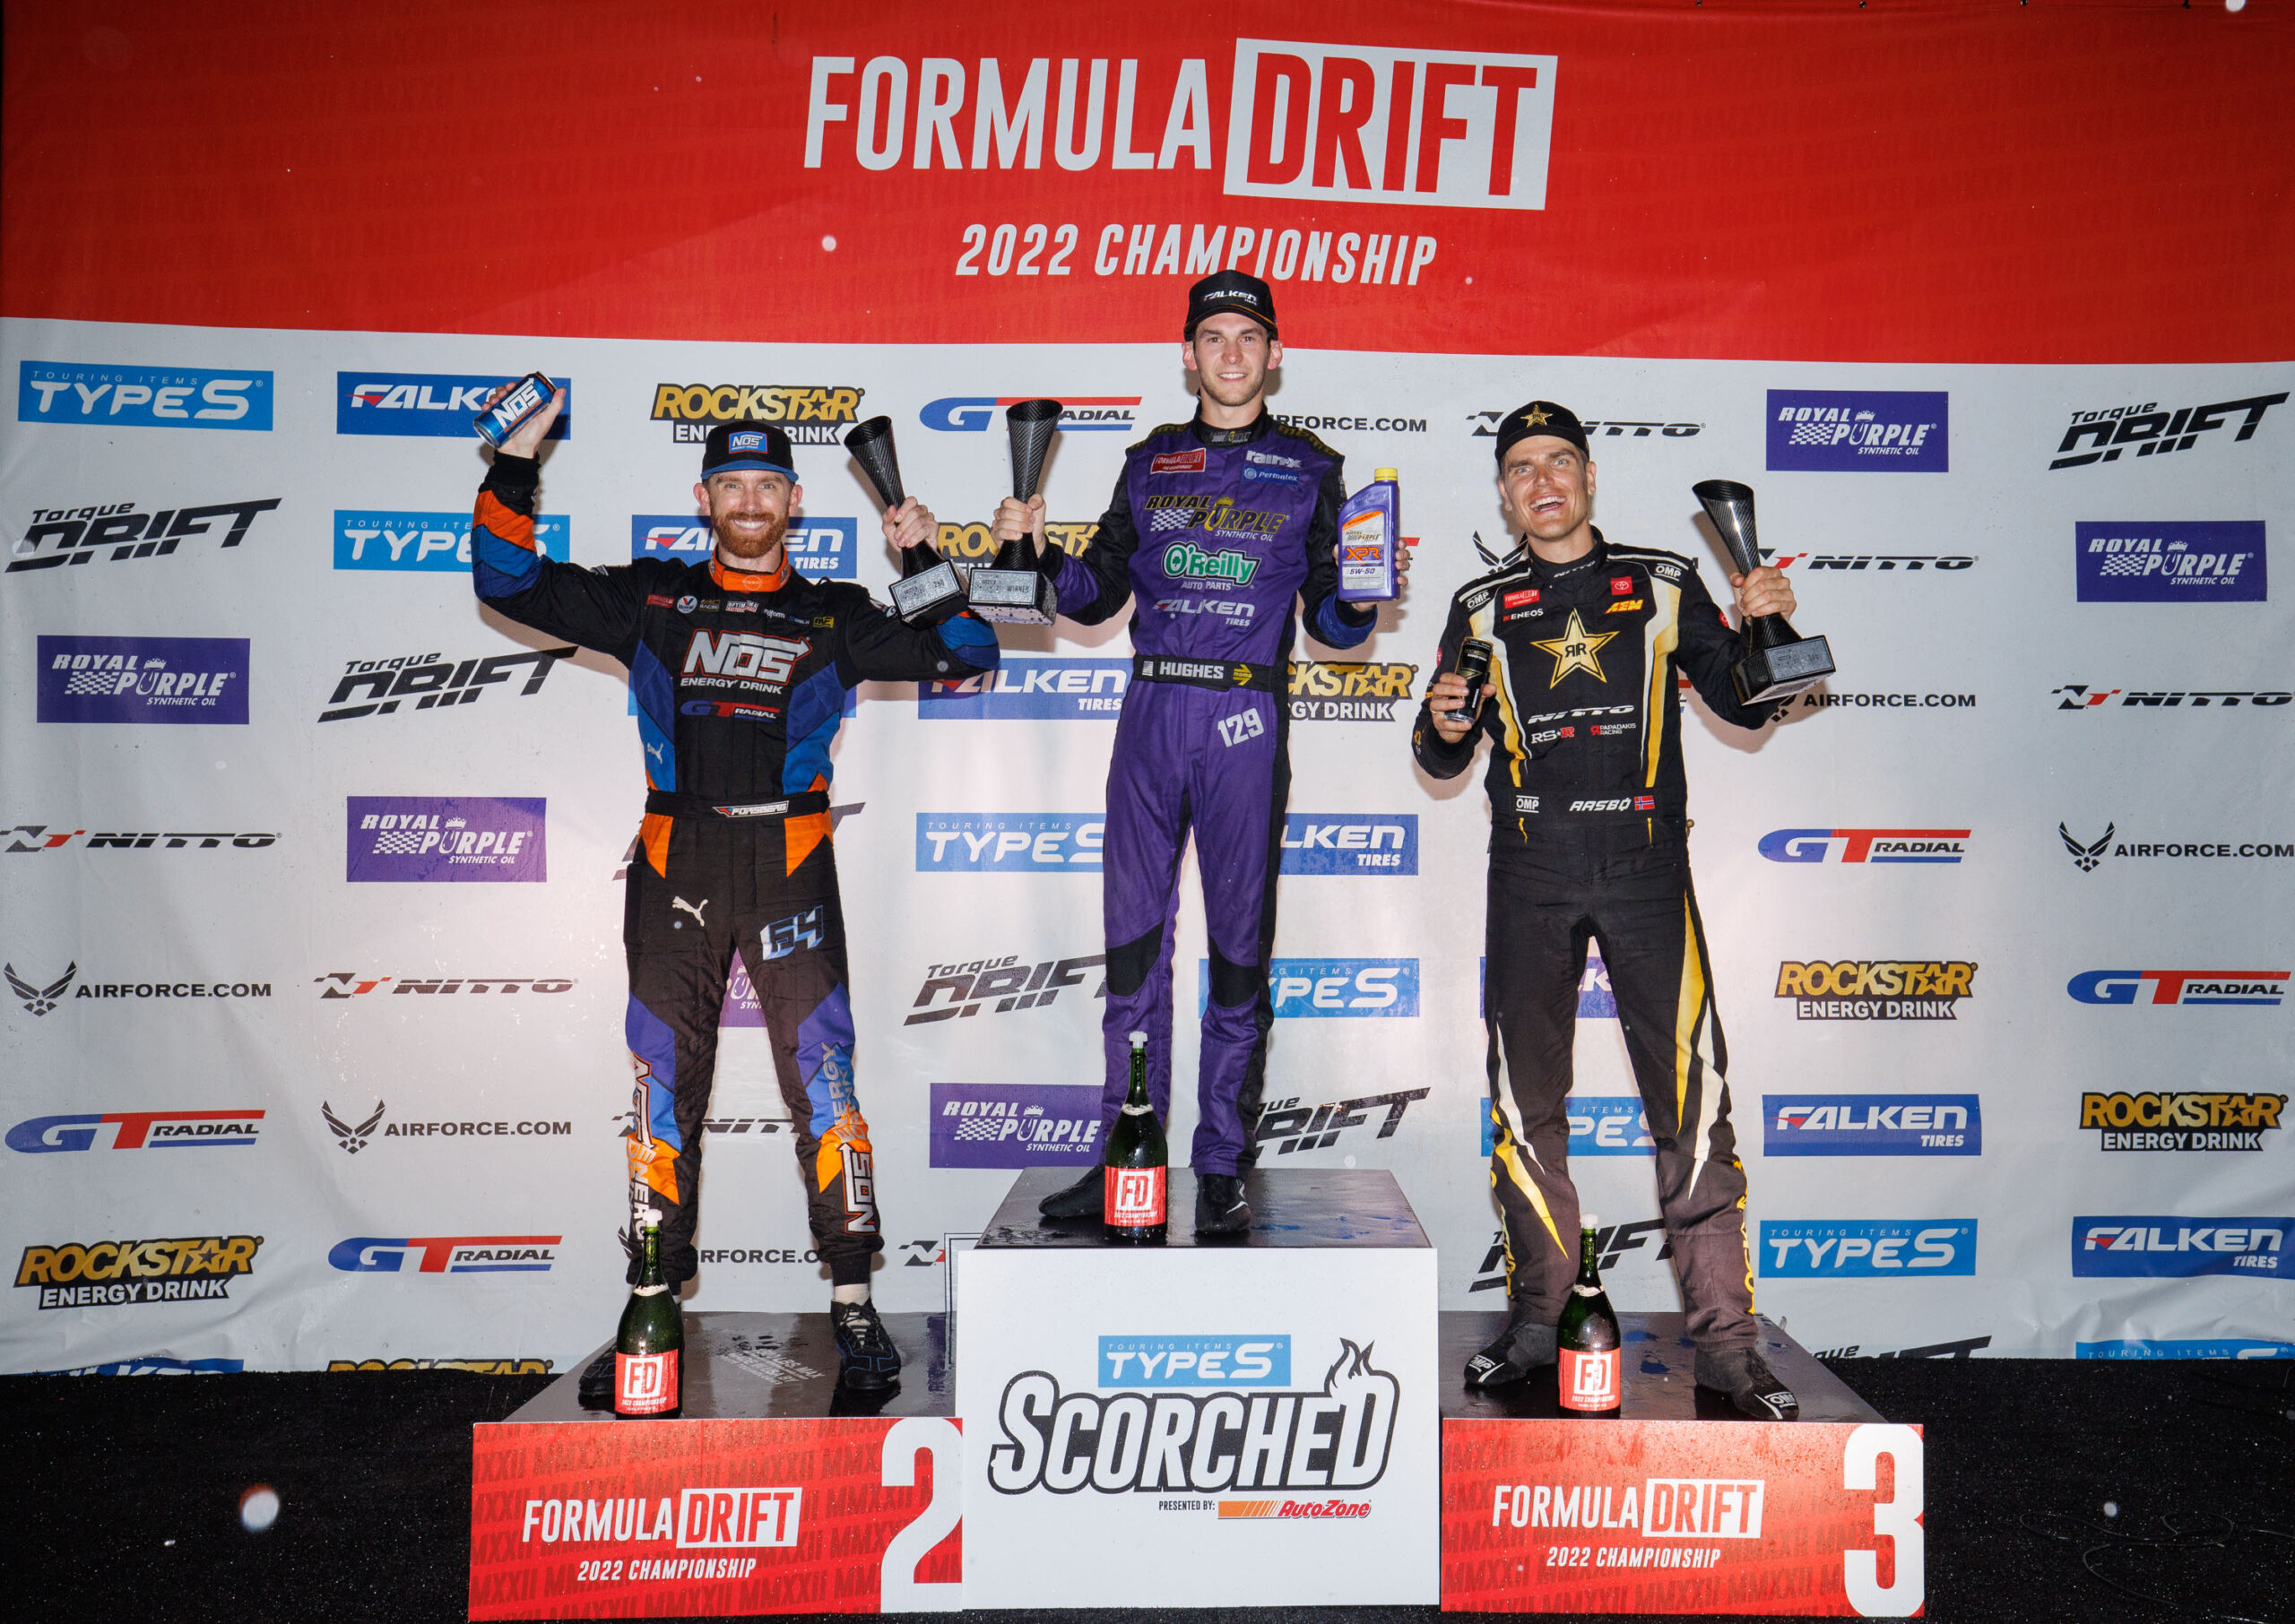 HUGHES CLAIMS FIRST WIN AT FORMULA DRIFT PRO ROUND 3 IN ORLANDO, HATELEY WINS PROSPEC